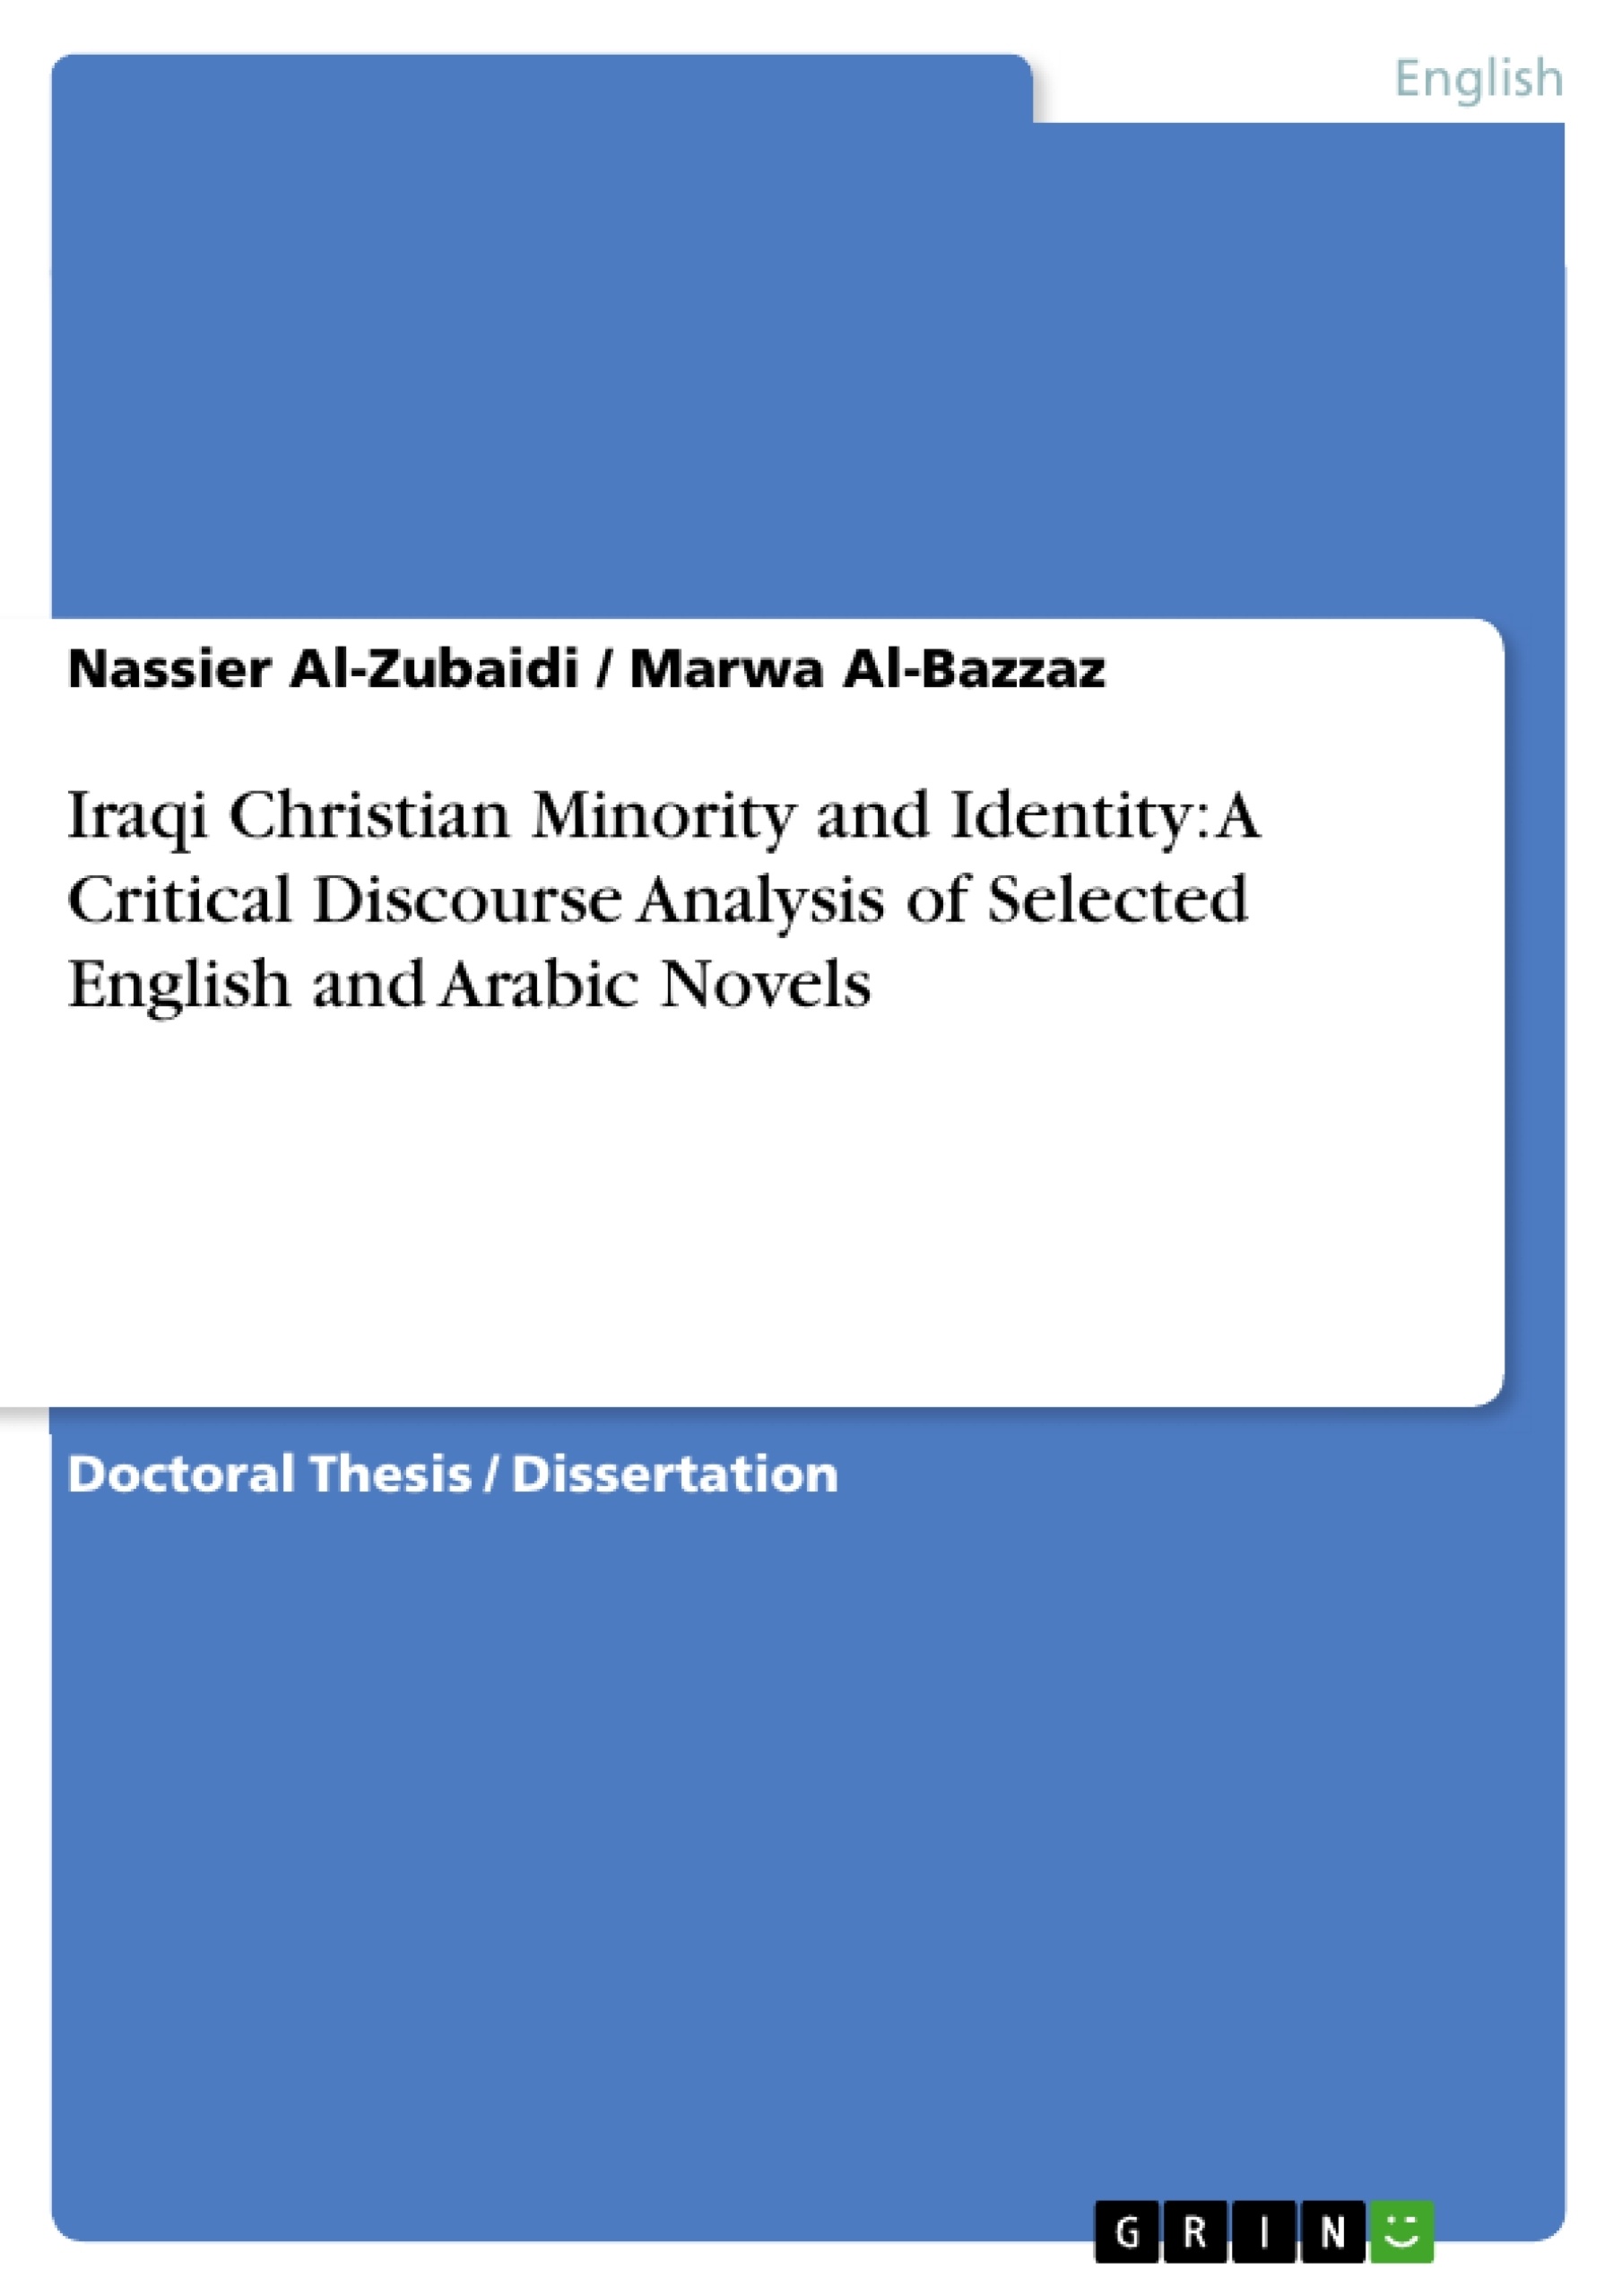 Title: Iraqi Christian Minority and Identity: A Critical Discourse Analysis of Selected English and Arabic Novels